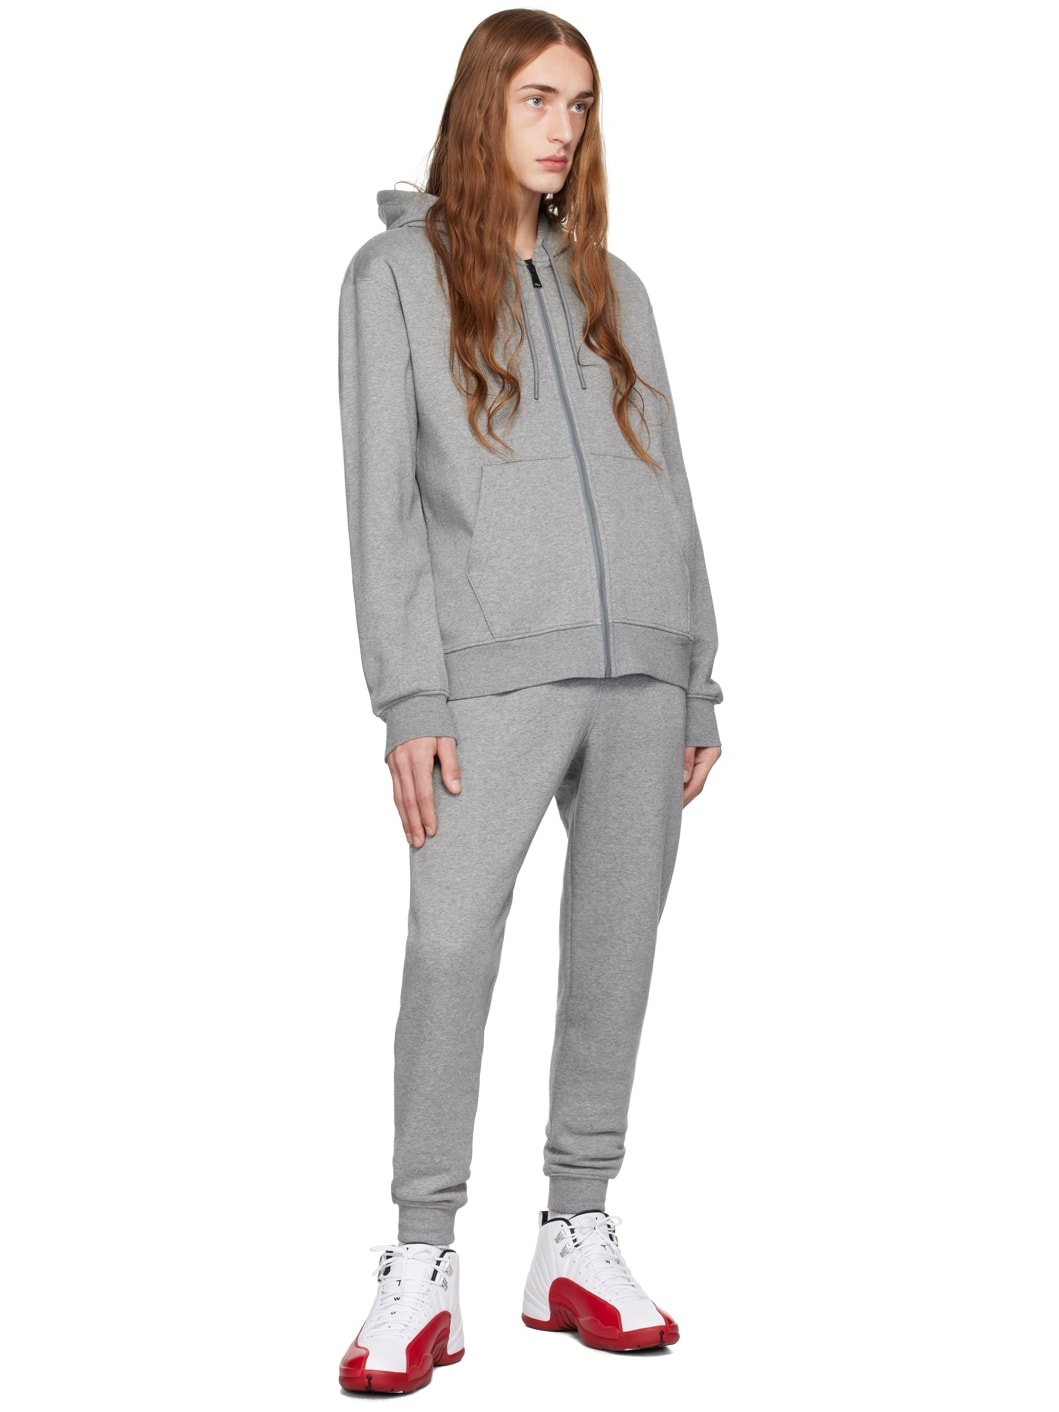 Gray Embroidered Sweatpants - 4